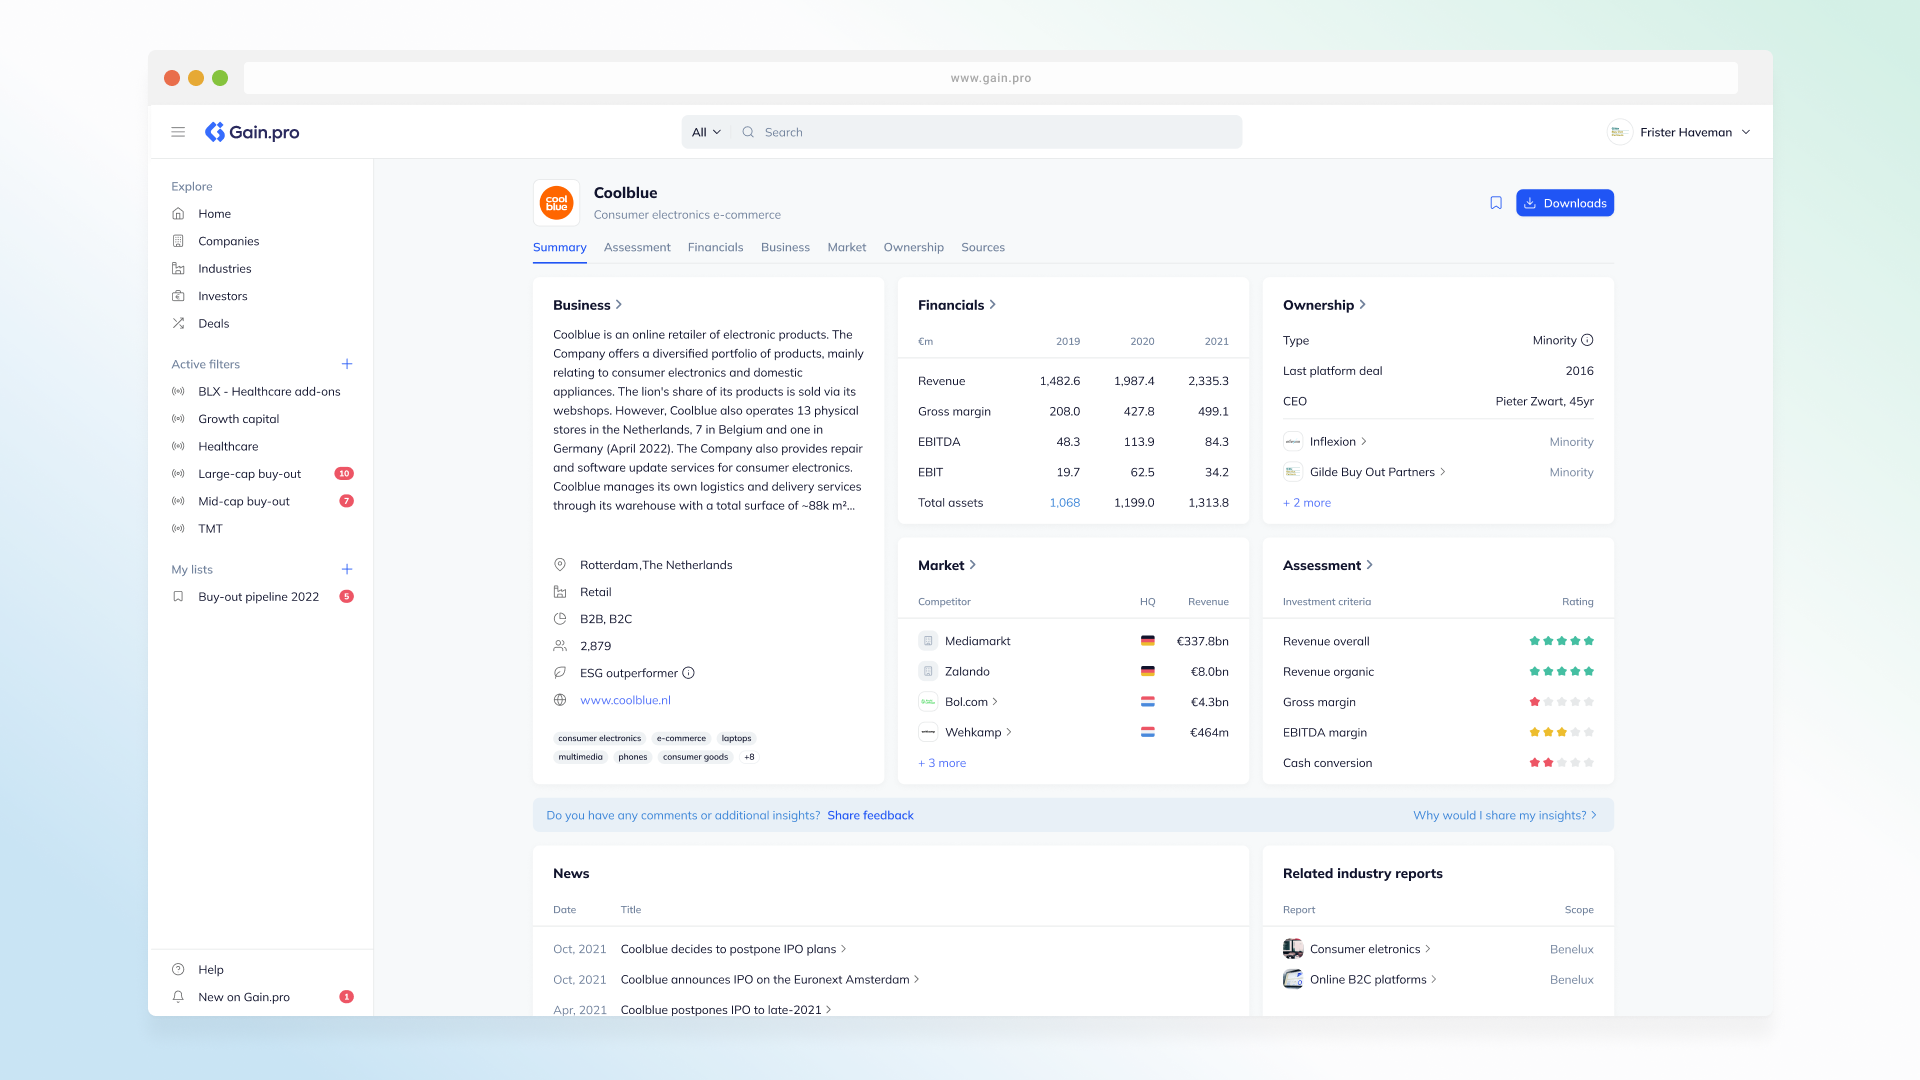 Supercharge your research workflow by getting detailed insights on sizeable companies. Get financials sourced directly from registrars and adjusted for use, be able to do benchmark against actual competitors and find historical ownership and M&A details.